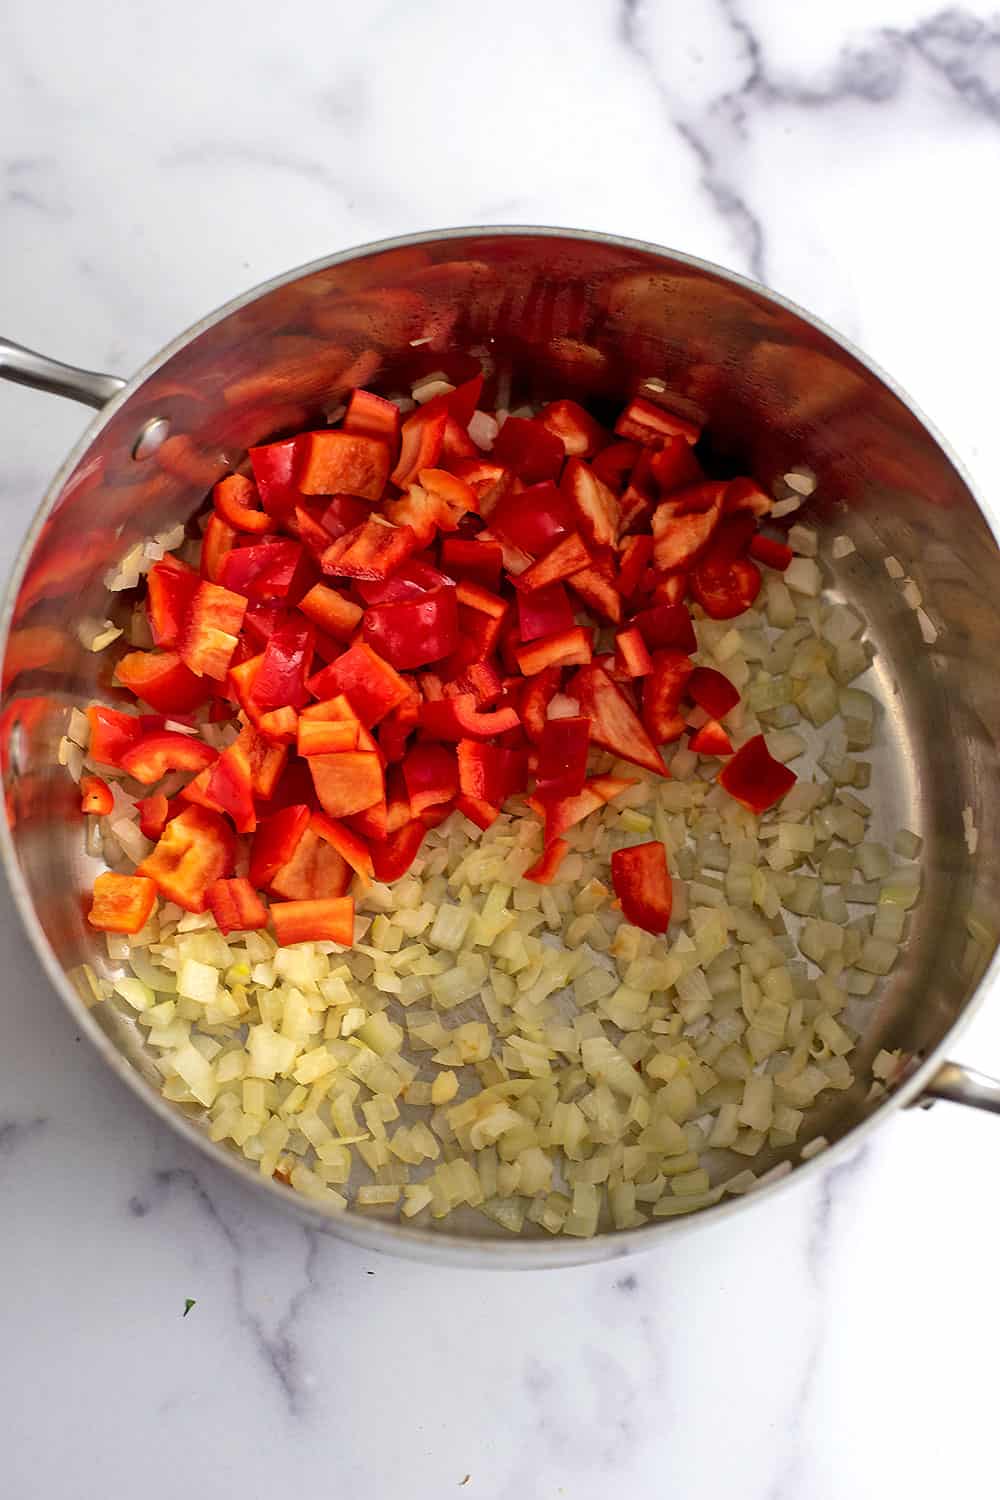 Fresh red bell peppers added to pot with cooked onions.